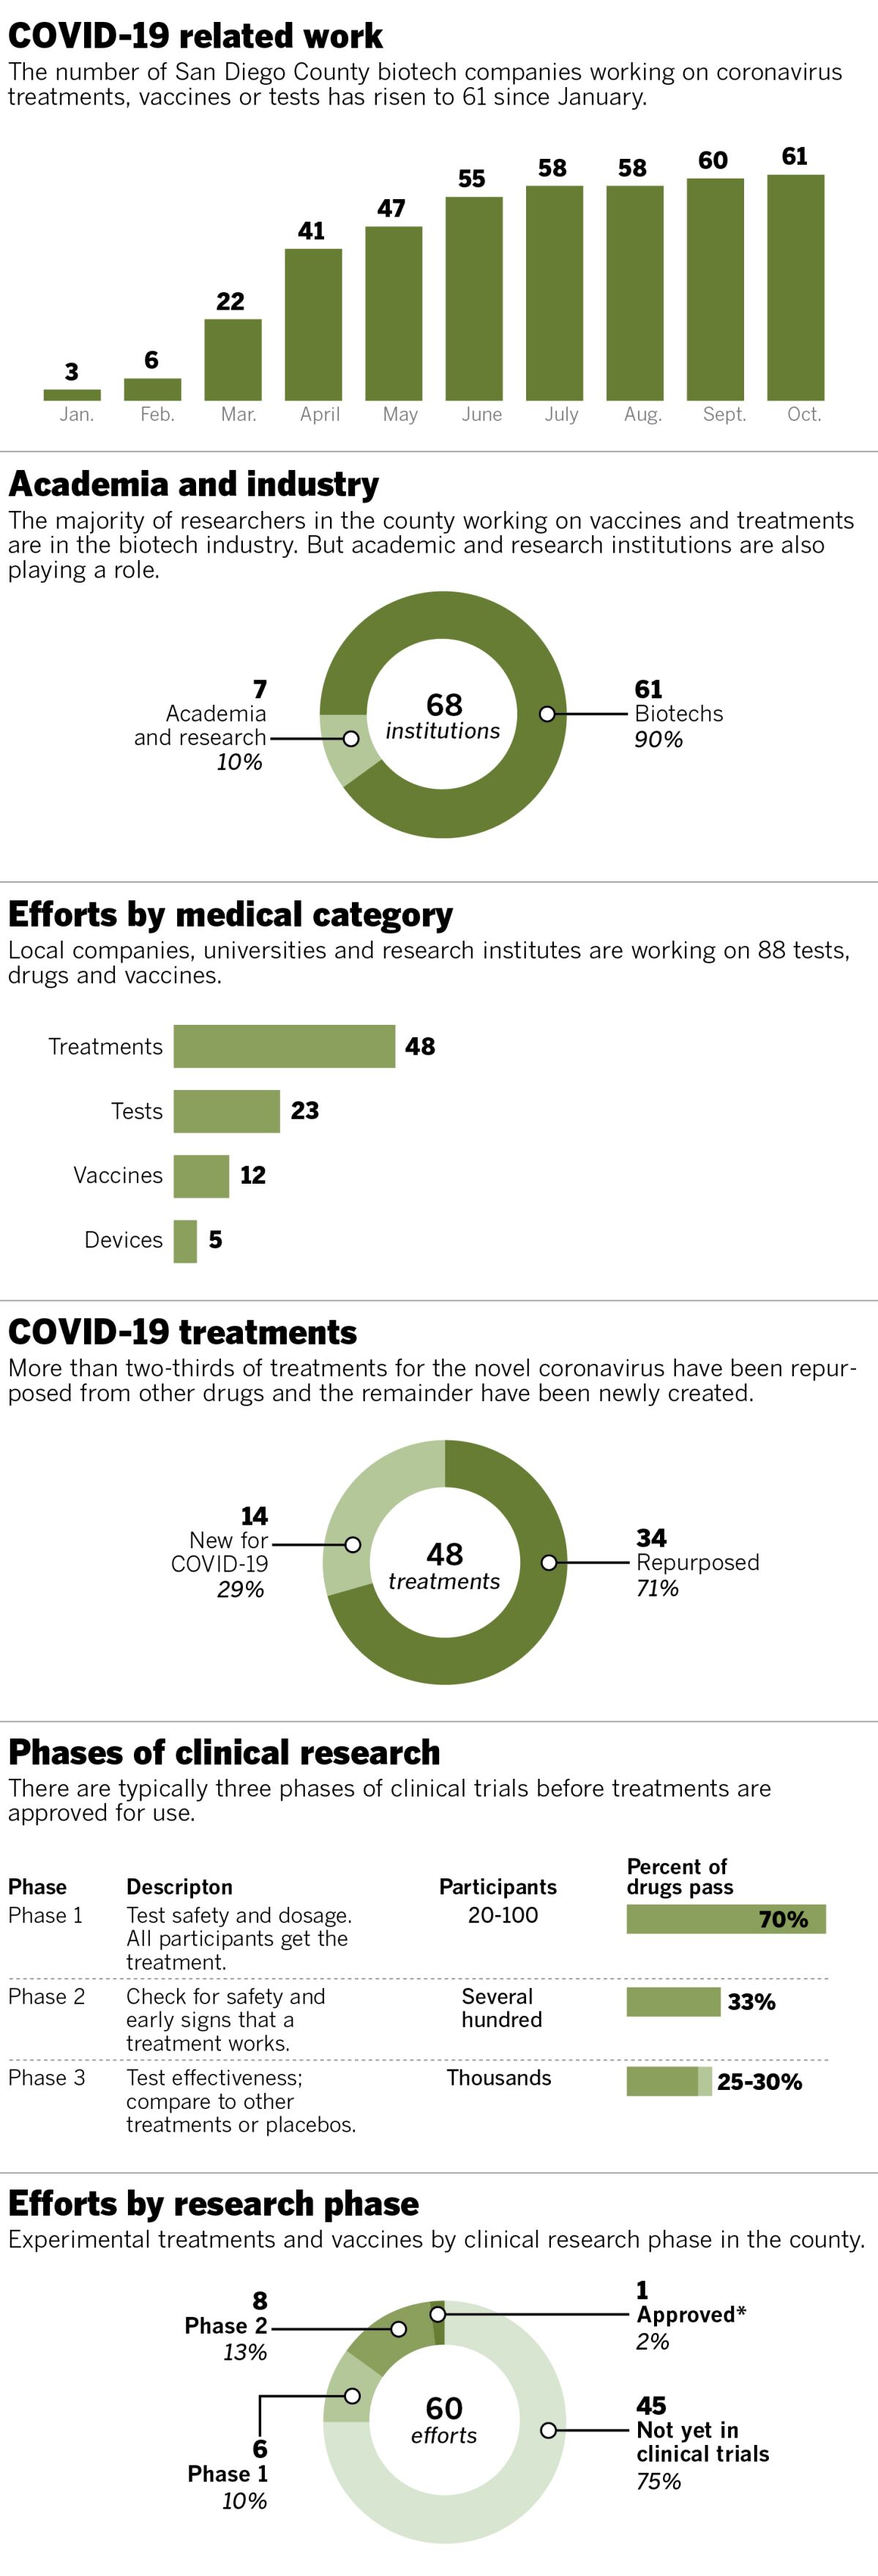 Graphics of the fight against COVID-19 in San Diego's biotech companies